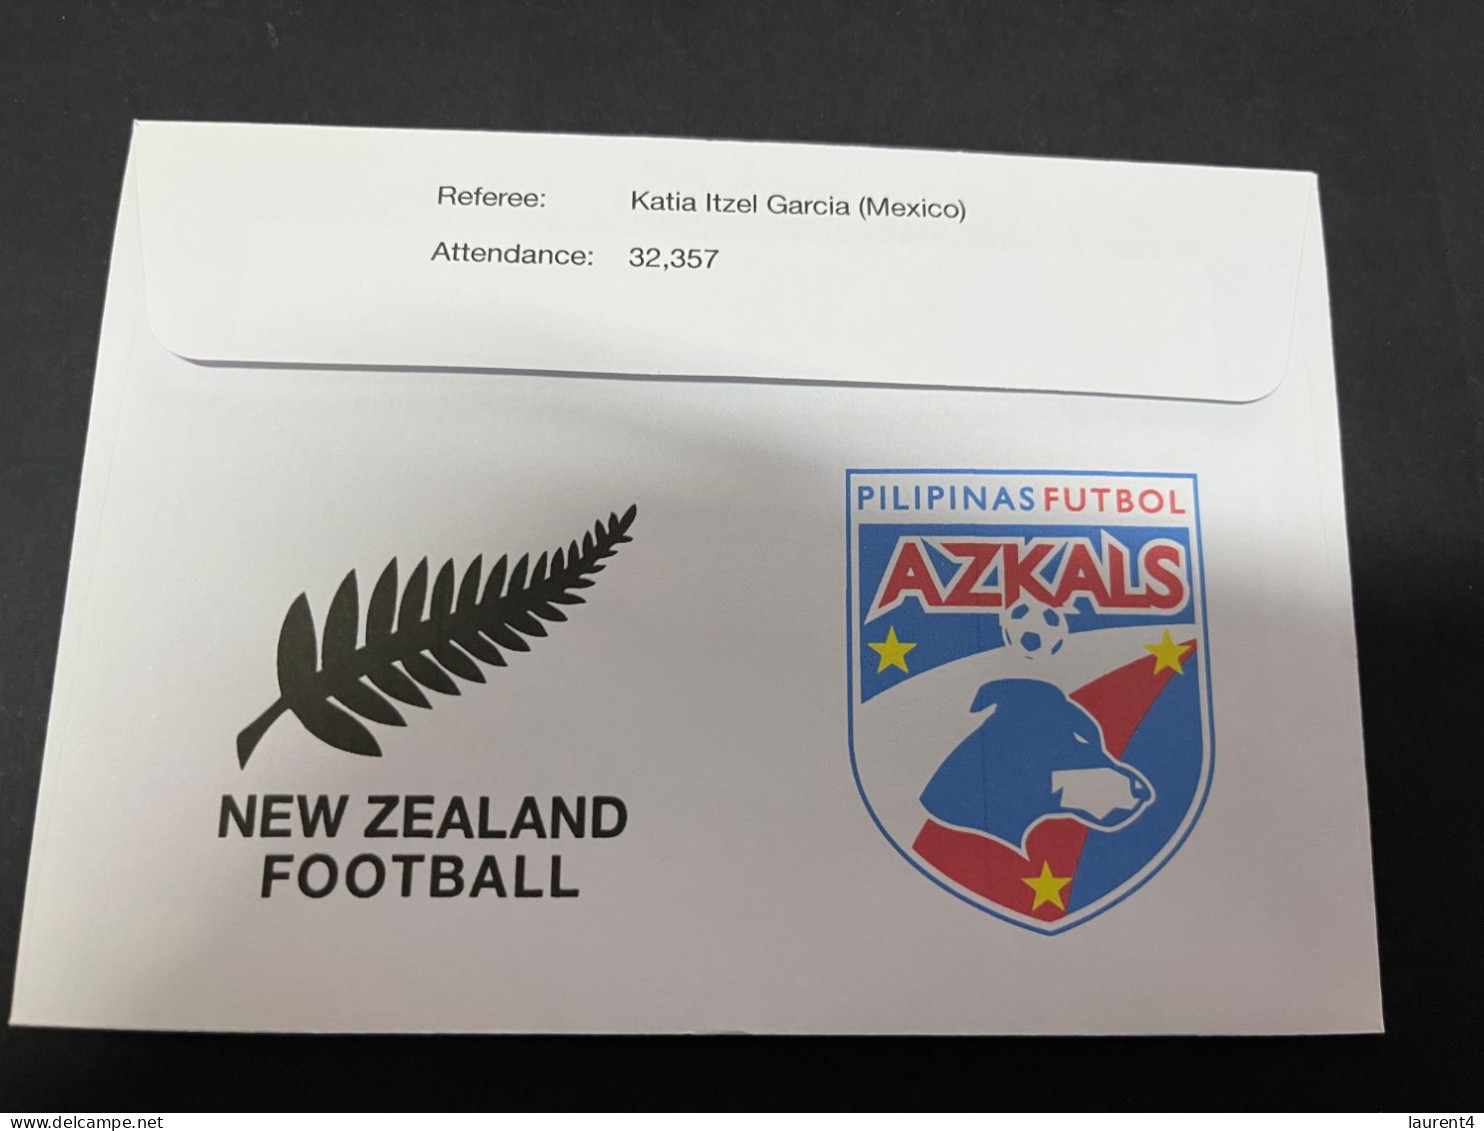 24-1-2024 (2 X 14) 2 Covers - FIFA Women's Football World Cup 2023 - New Zealand V Philippines - Other & Unclassified